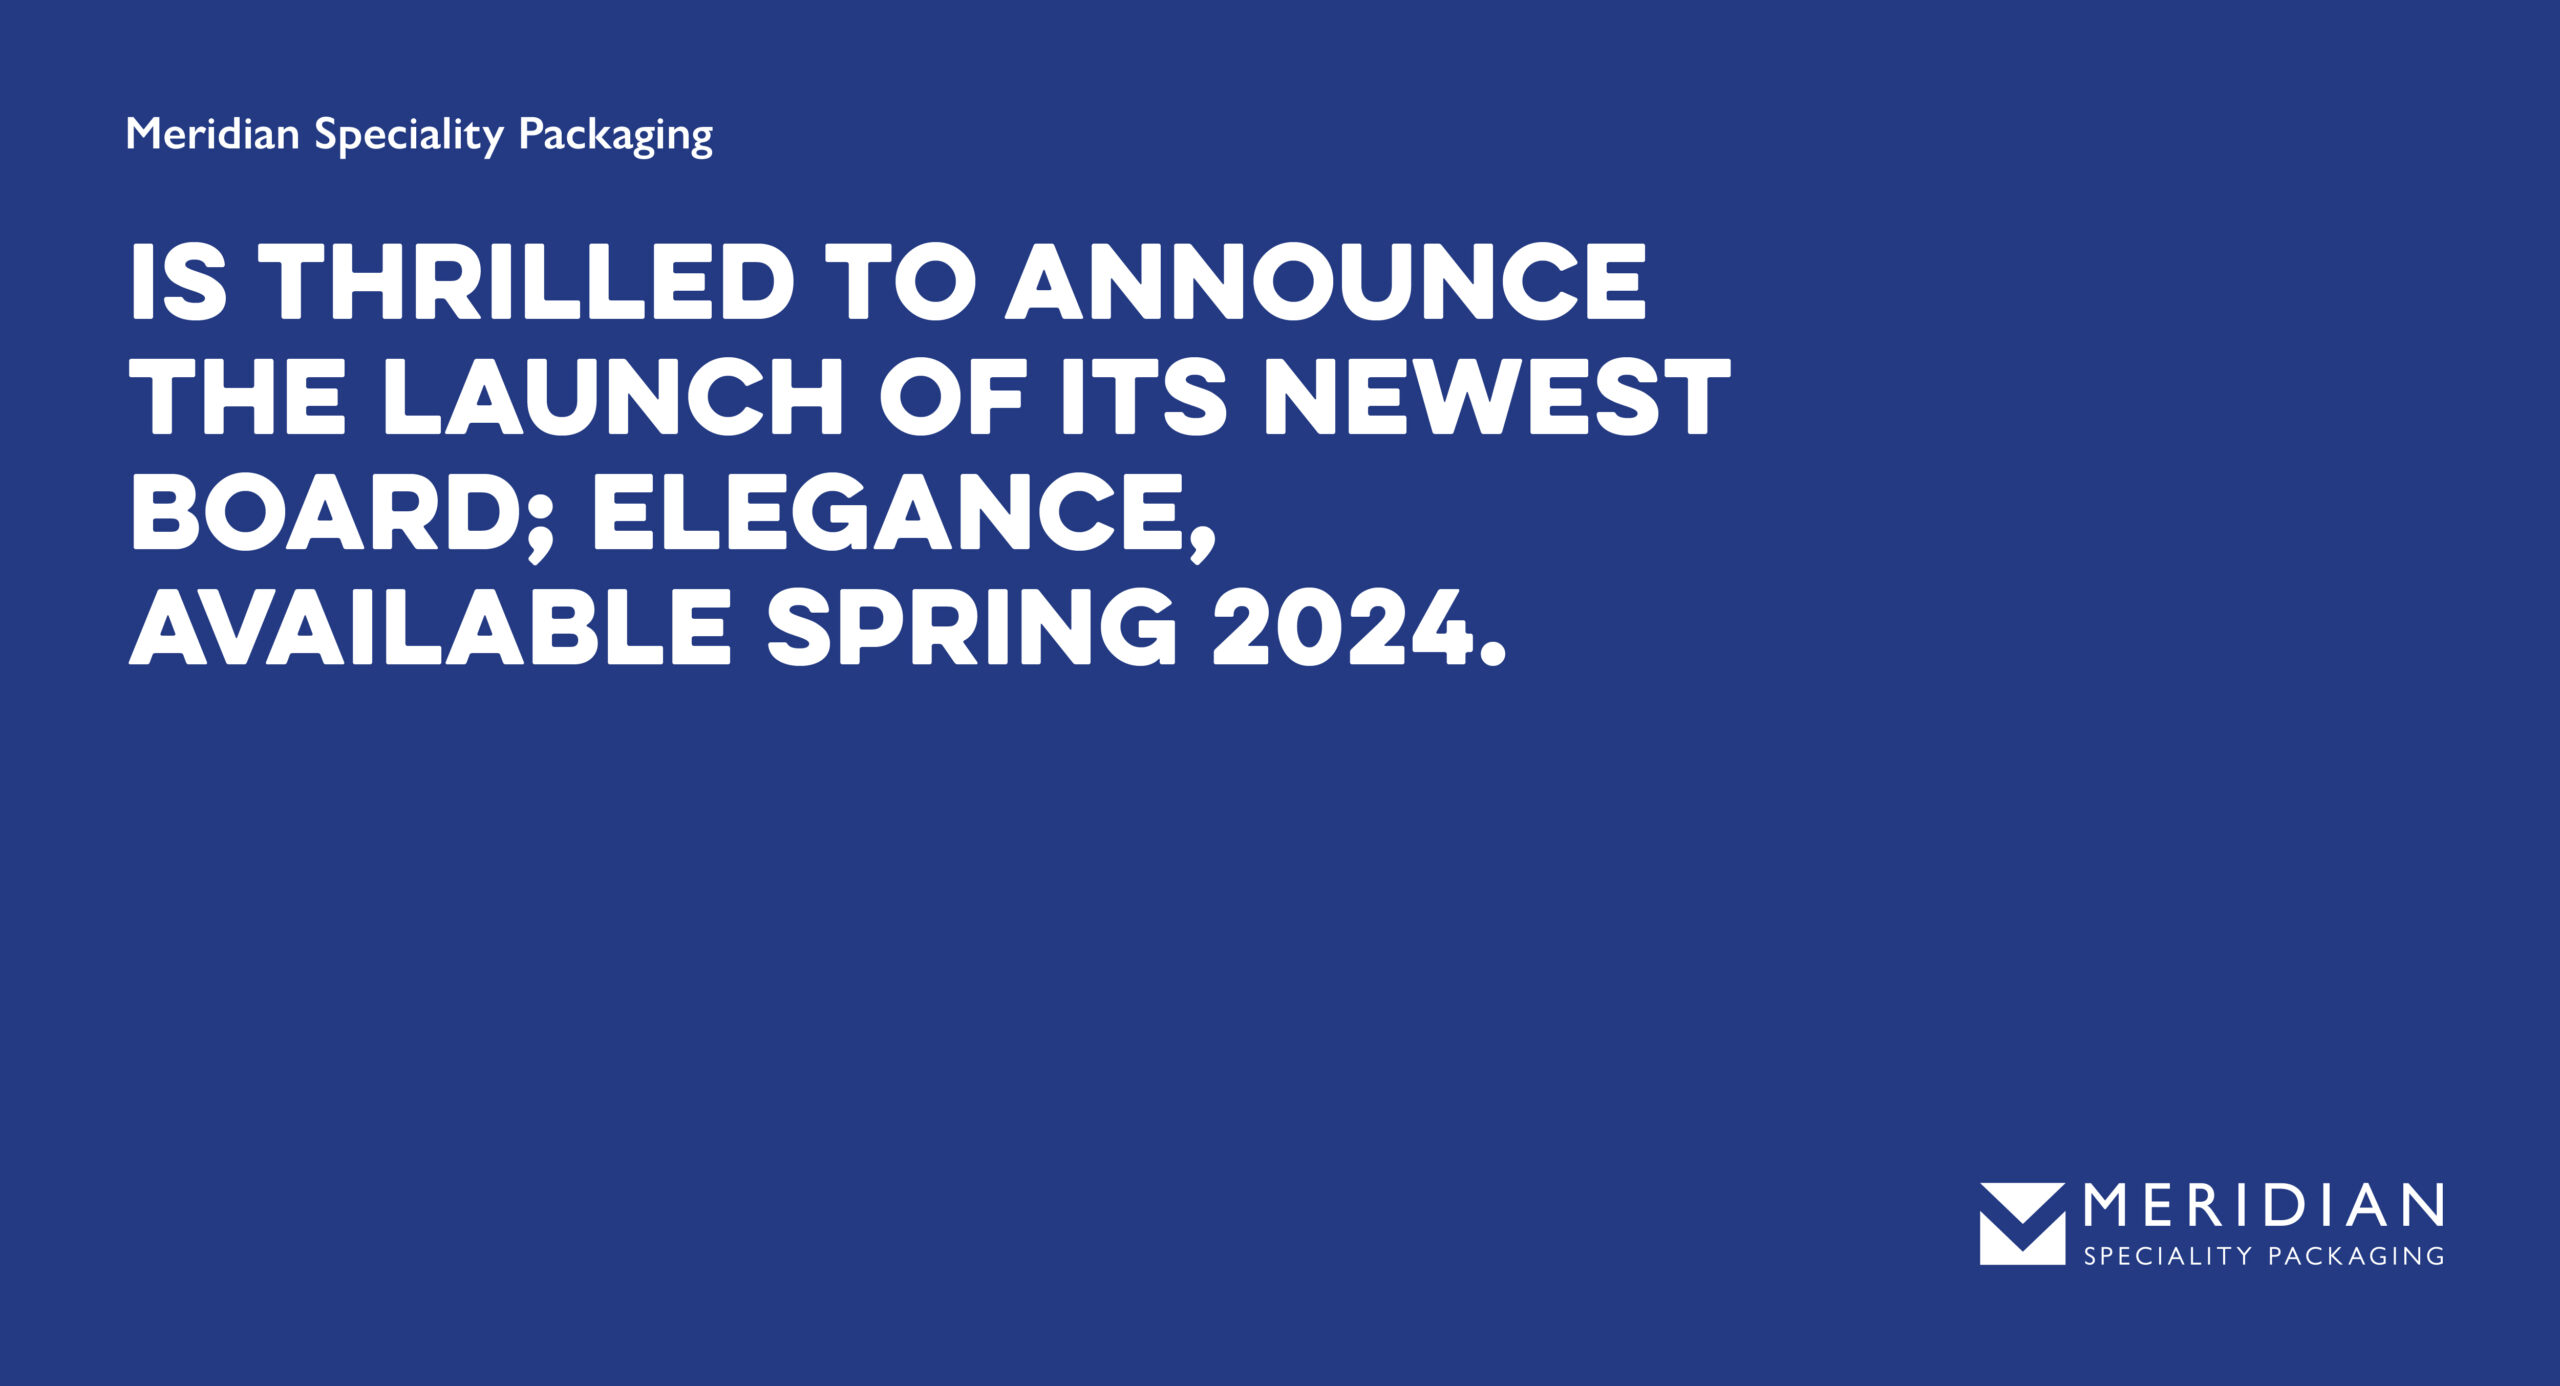 Meridian Speciality Packaging is thrilled to announce the launch of its newest board; Elegance, available Spring 2024.